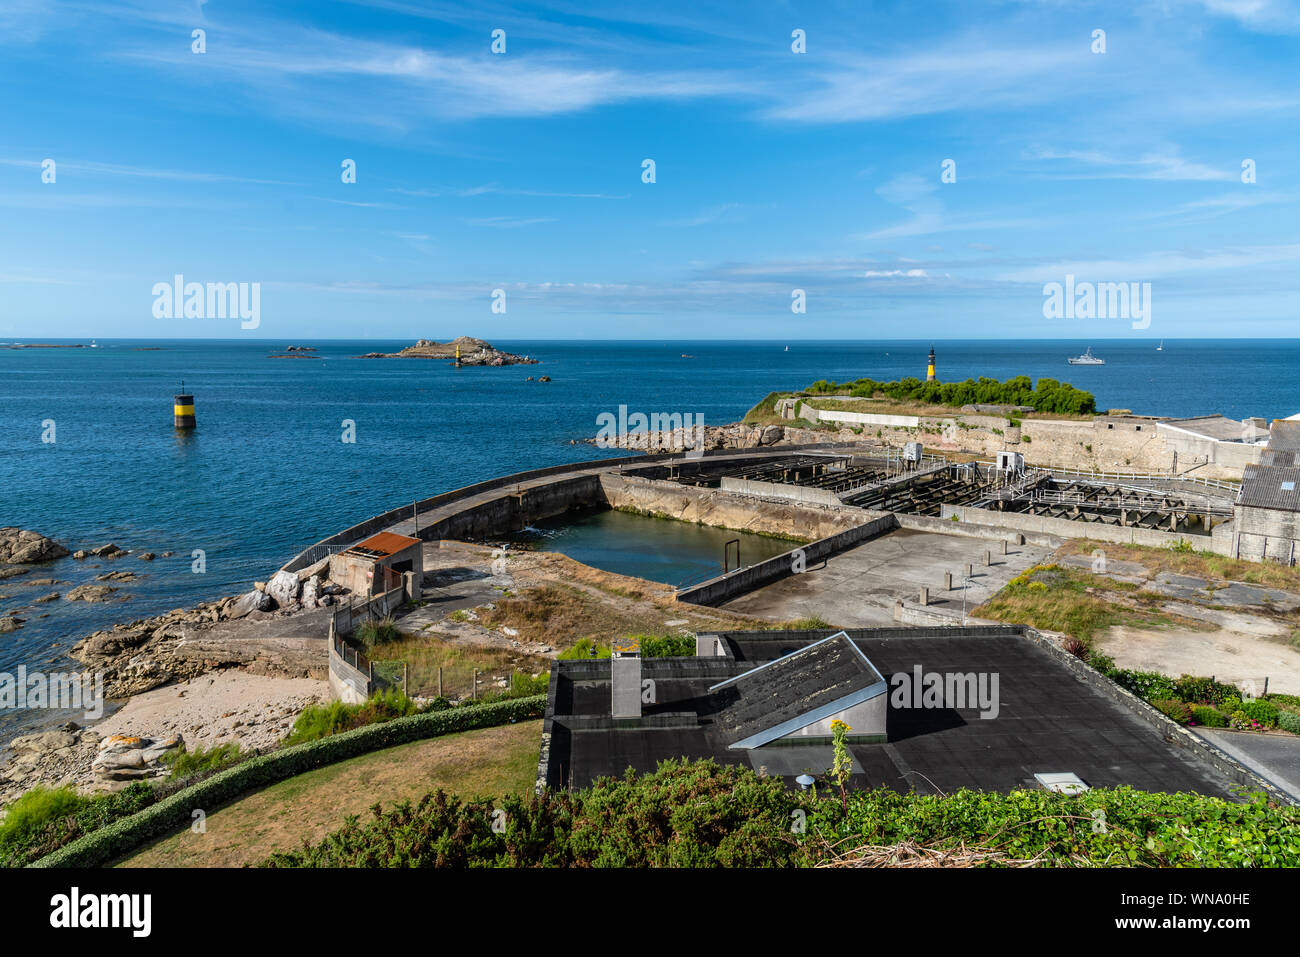 Roscoff, France - July 31, 2018: Seafood hatchery industry high angle view Stock Photo